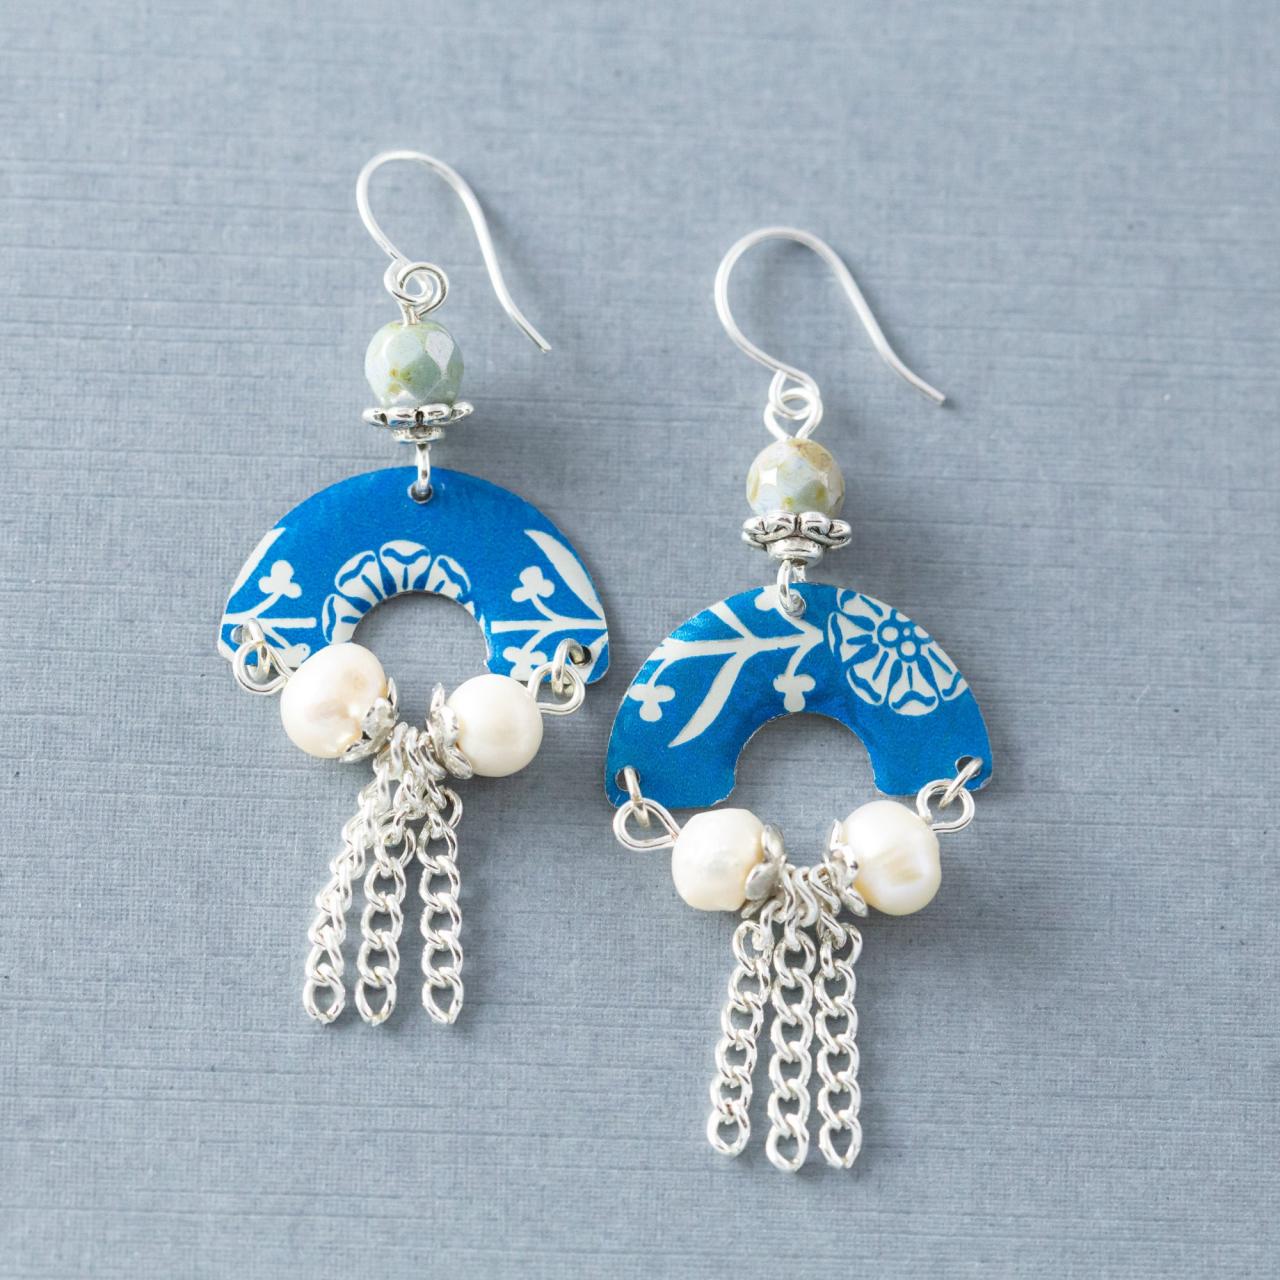 Blue And White Half Circle Tin Earrings With Silver Chain Fringe And Freshwater Pearls, Winter Jewelry